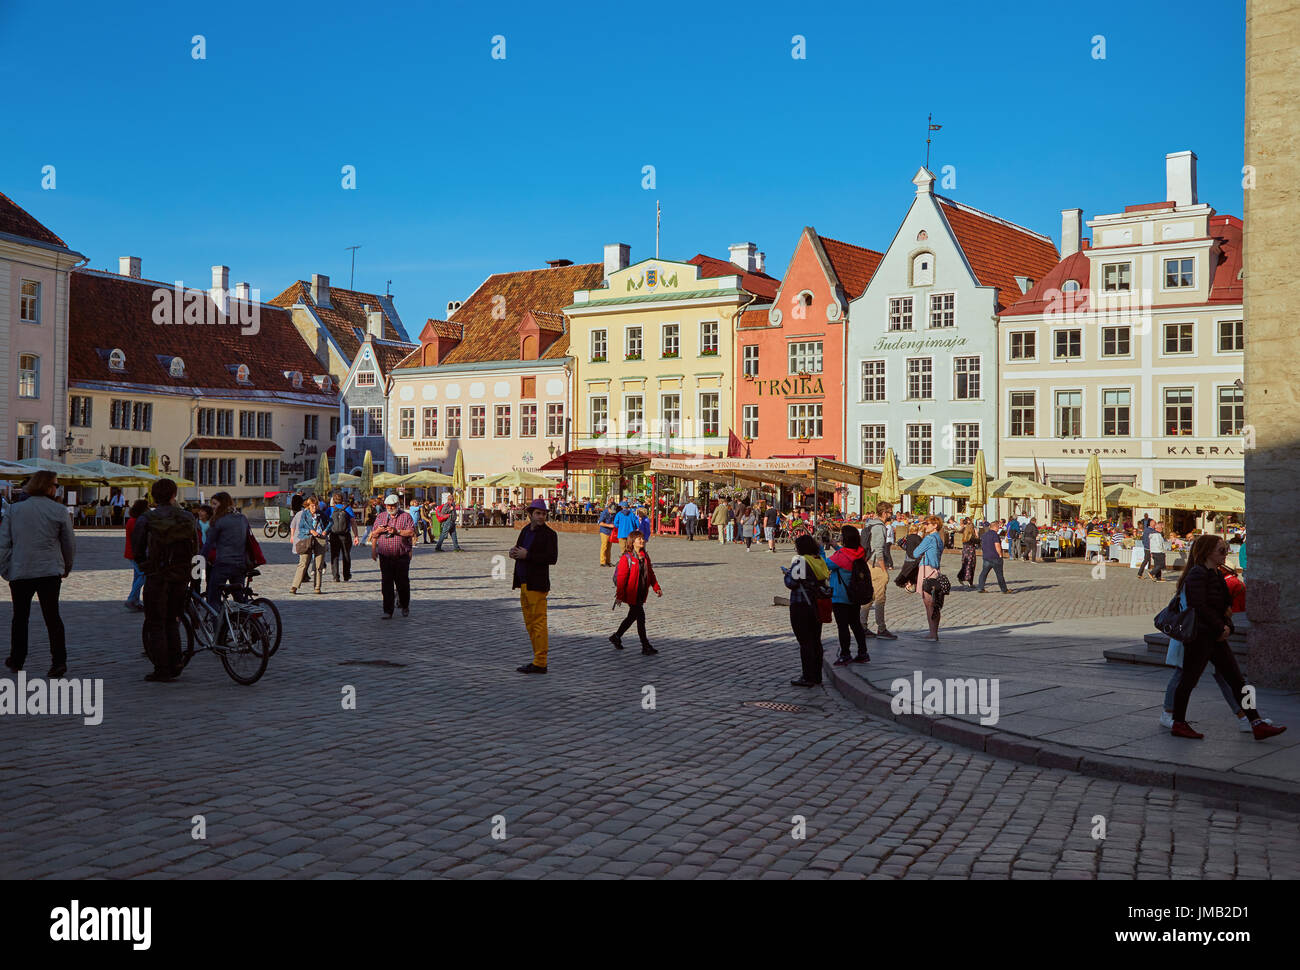 Town Hall Square with tourists on a summer sunny day Tallinn, Estonia Stock Photo